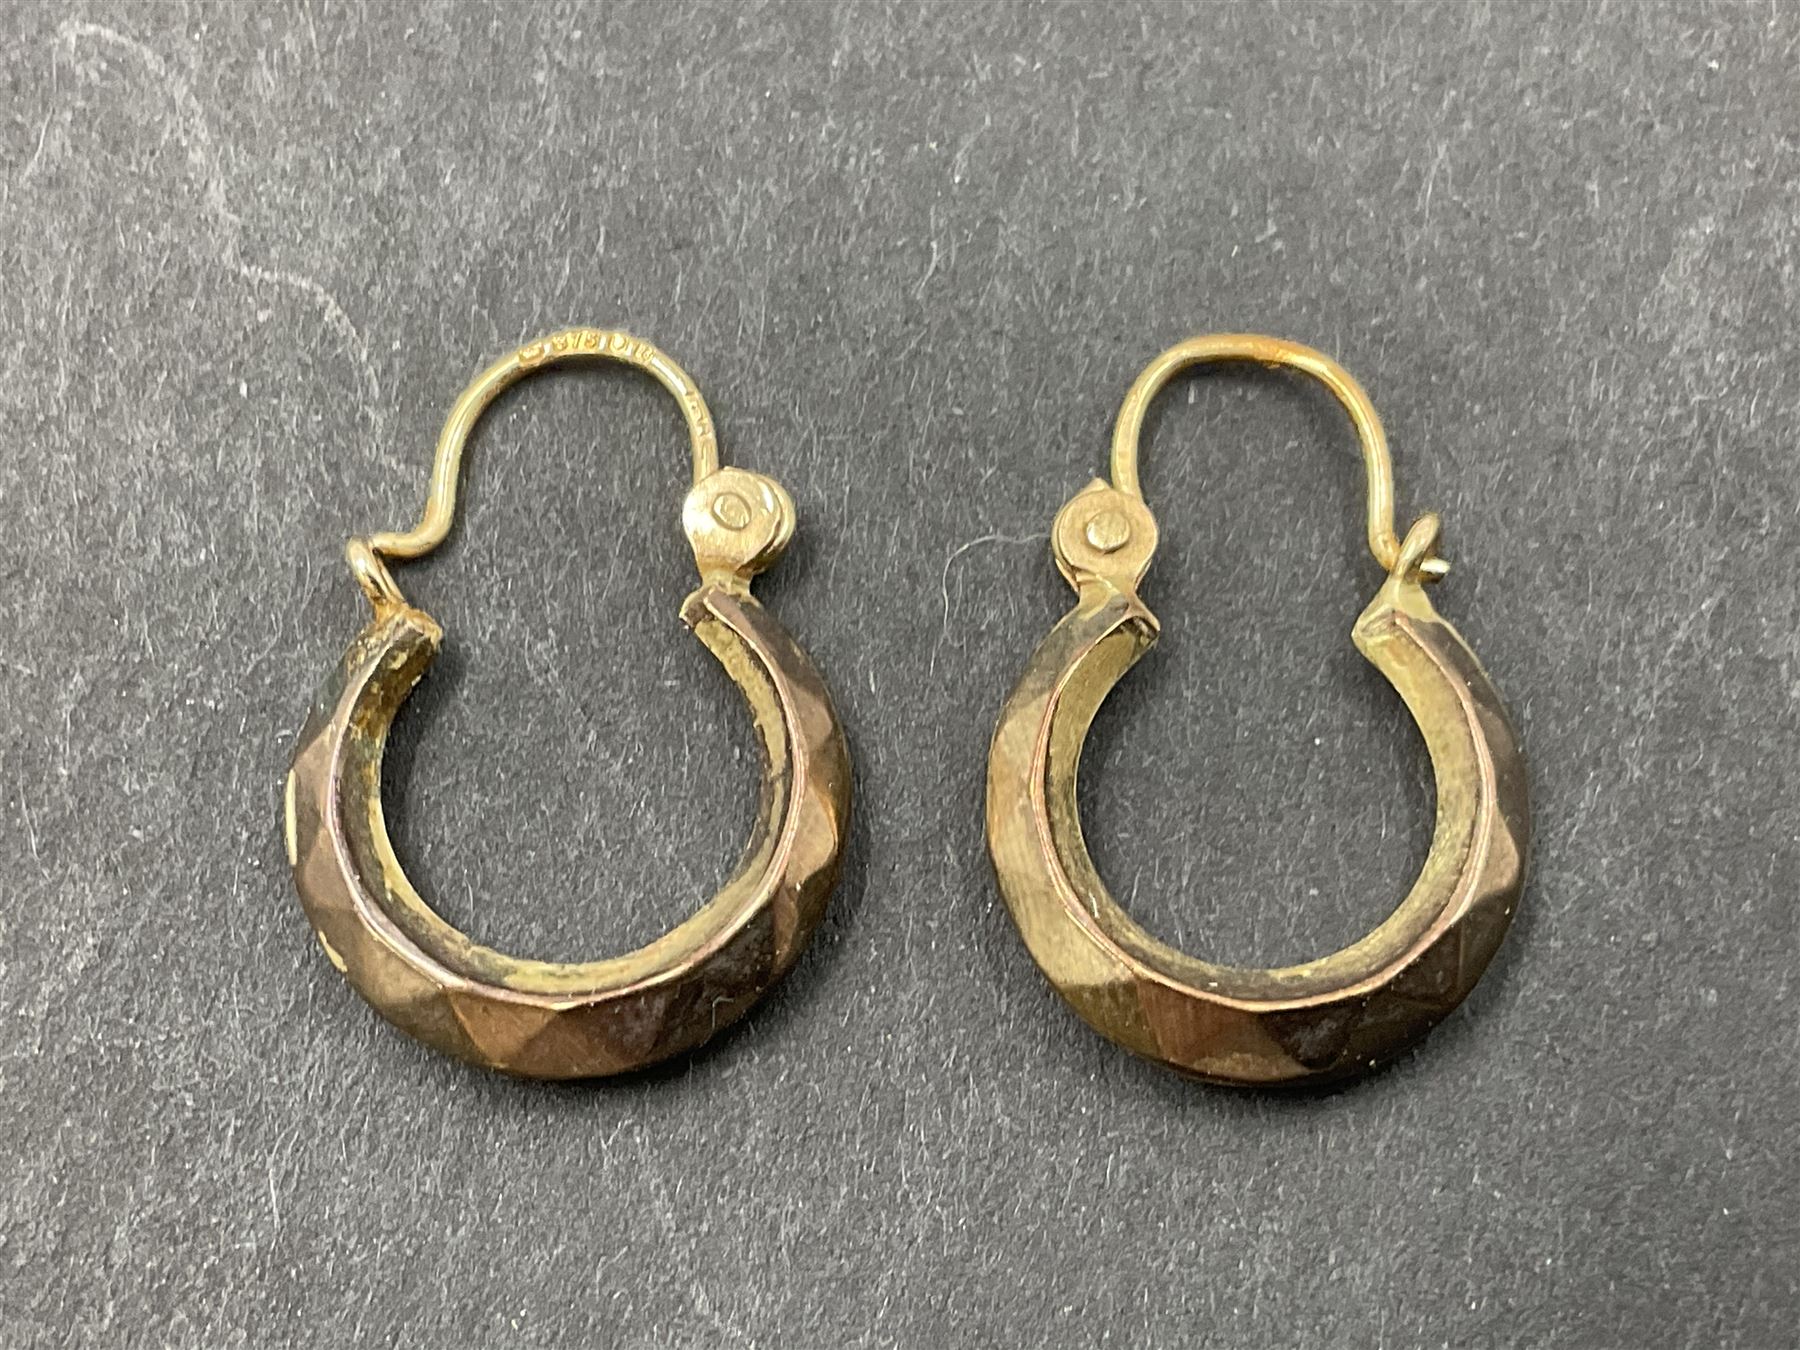 Two pairs of 9ct gold hoop earrings and 9ct gold earring oddments - Image 6 of 10